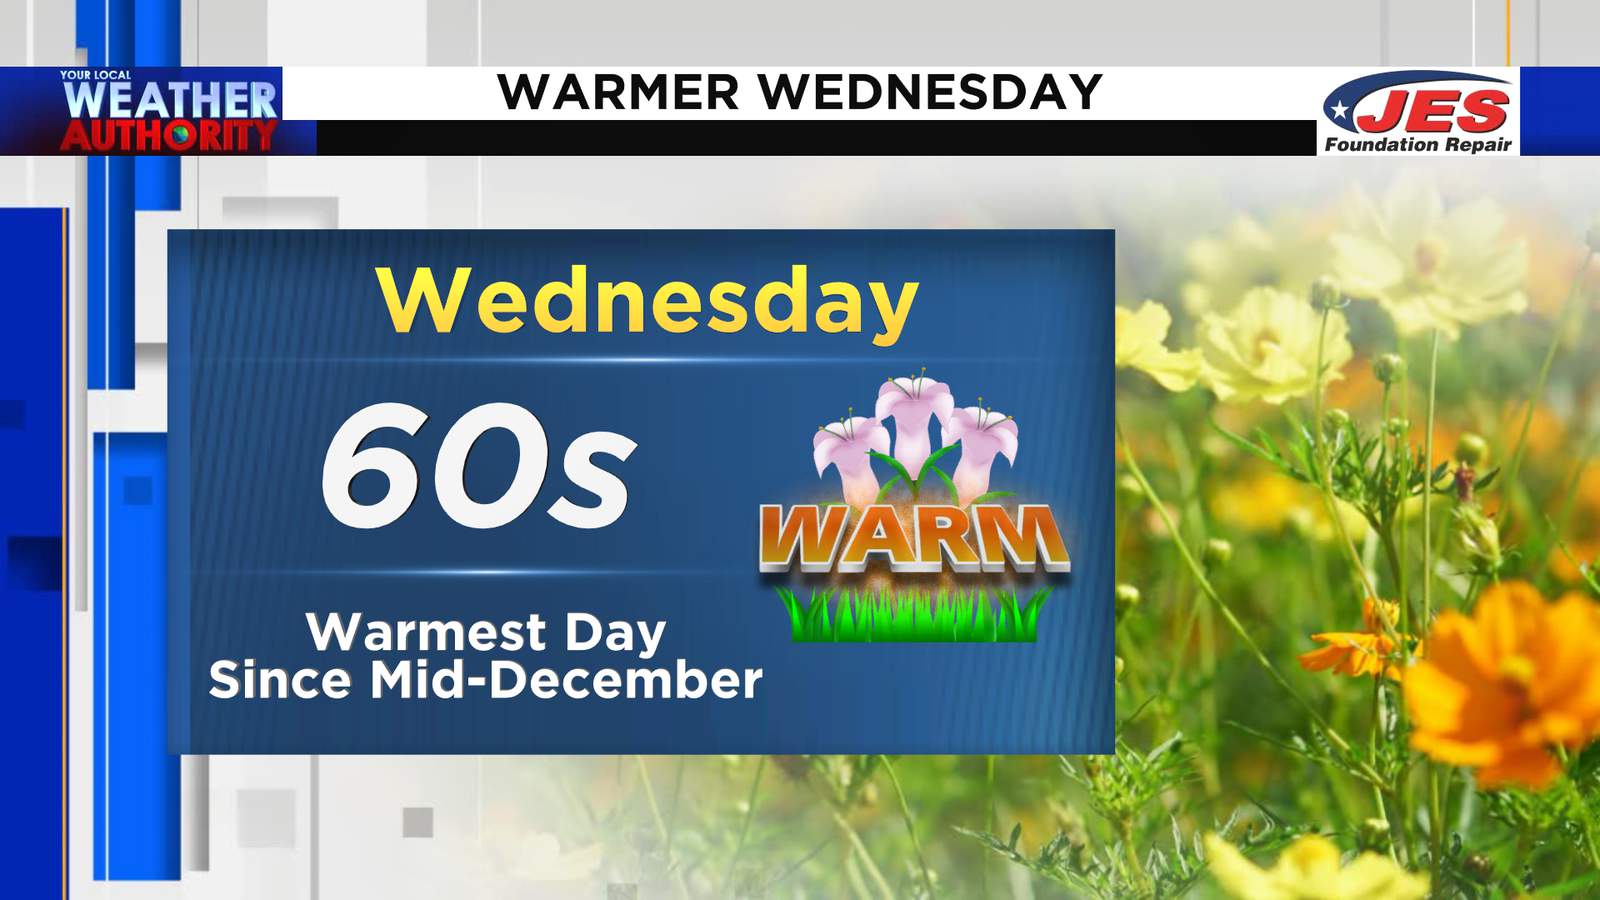 Wednesday likely to be our warmest day since before Christmas